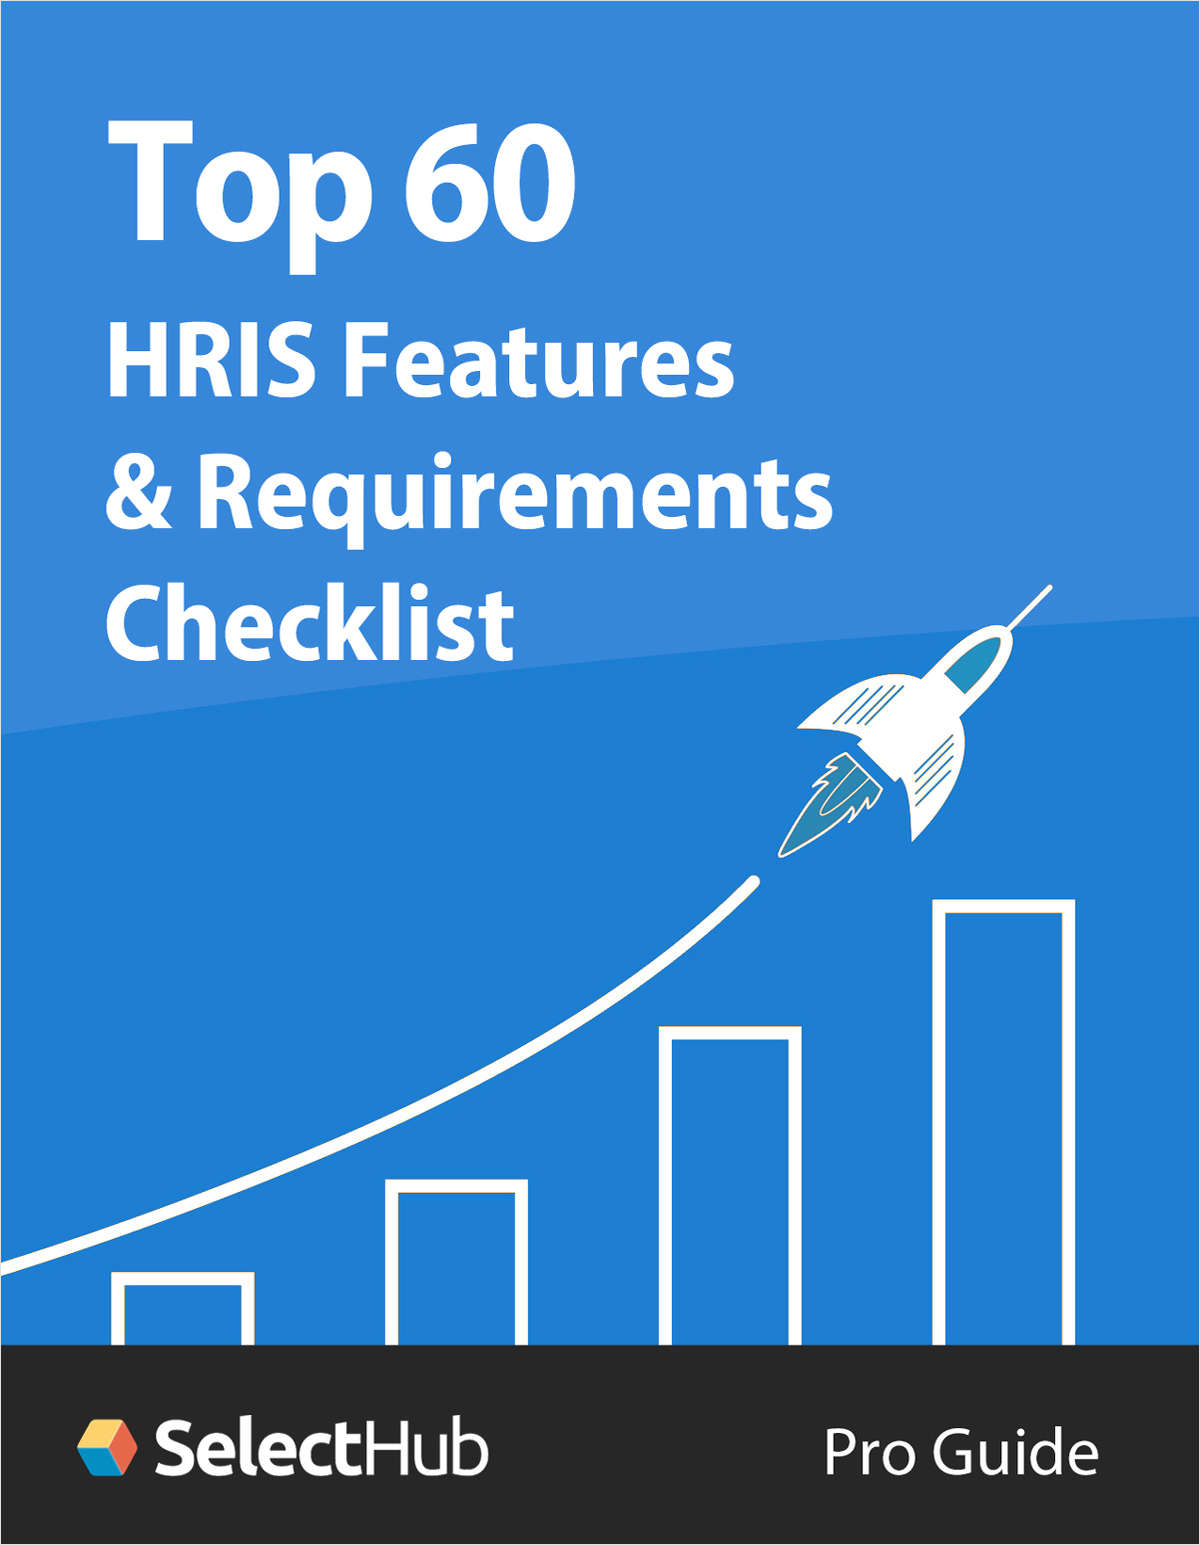 Top 60 HRIS Features & Requirements Checklist